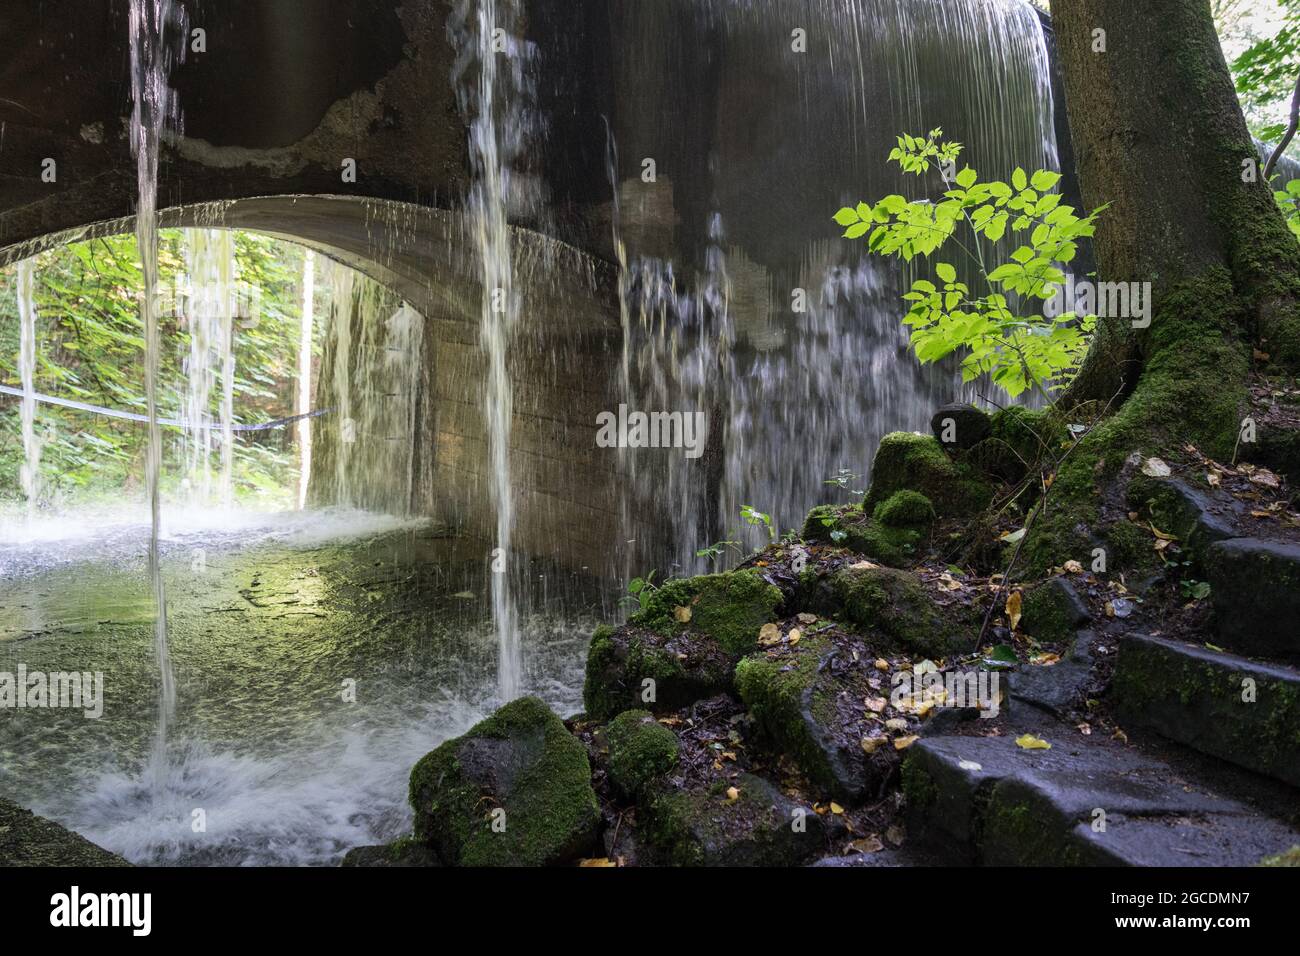 flowing water and hydropower in a remote idyllic location in nature Stock Photo